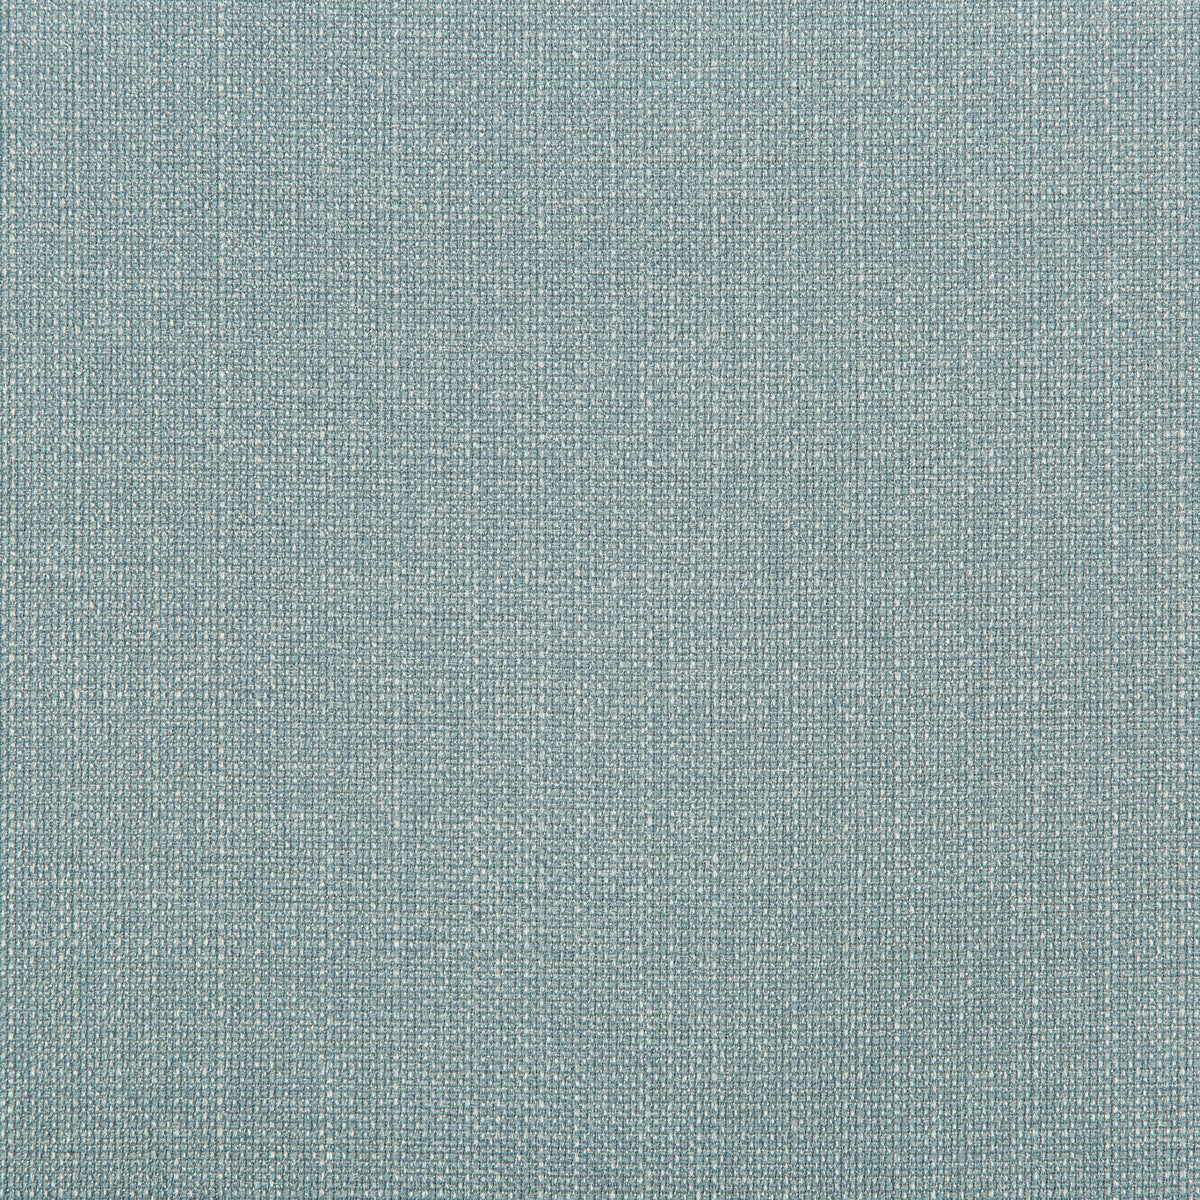 Kravet Contract fabric in 4642-15 color - pattern 4642.15.0 - by Kravet Contract